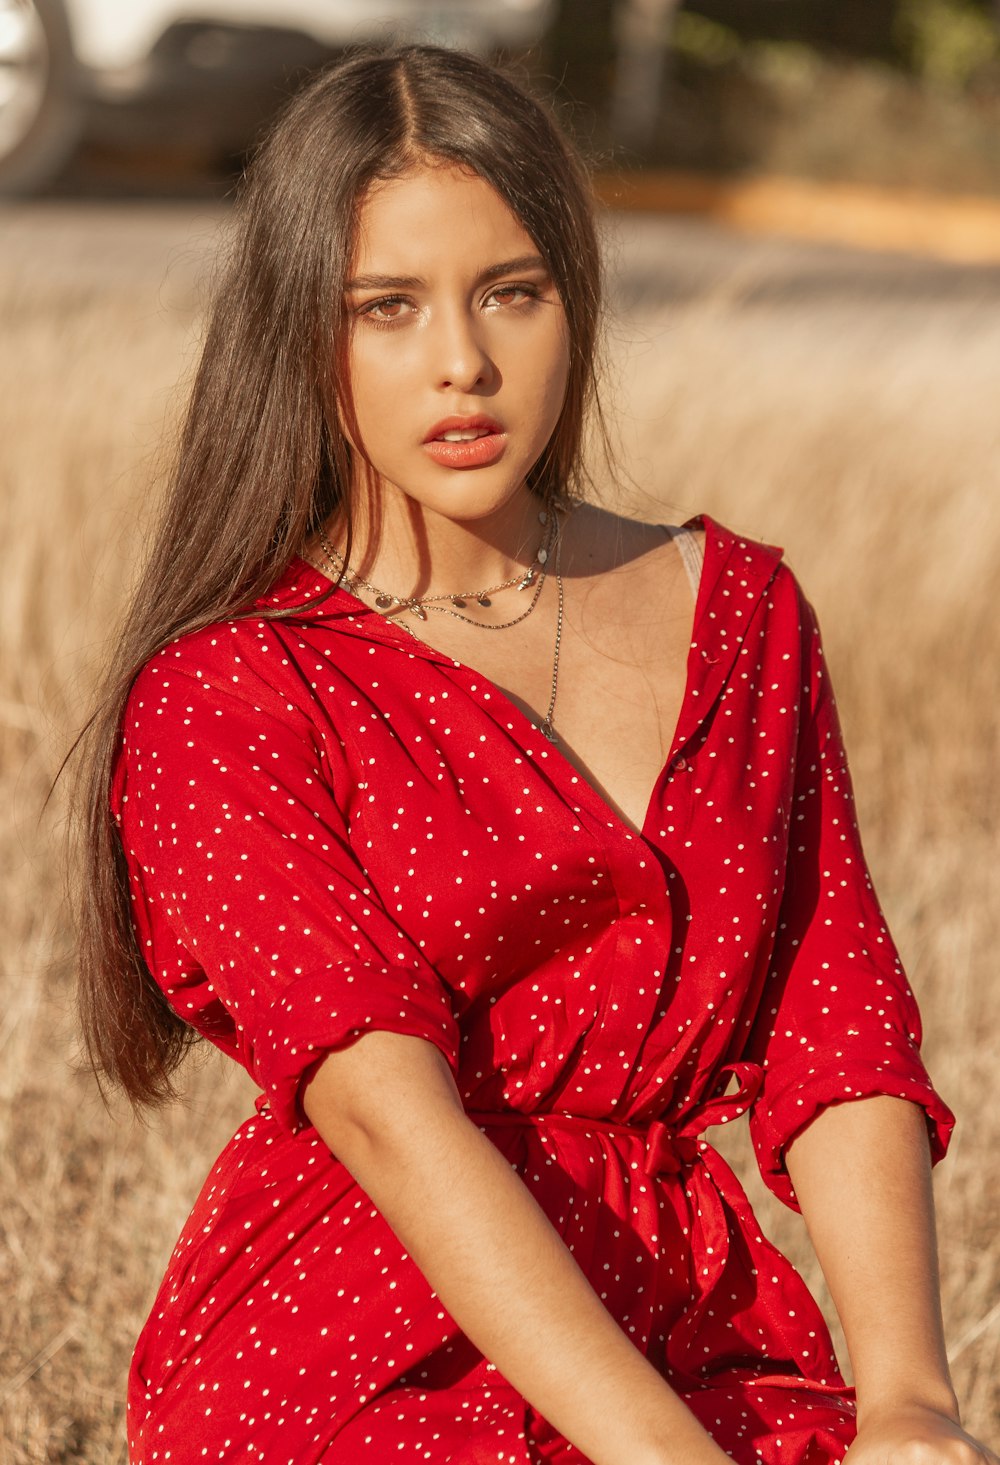 Woman in red and white polka dot dress photo – Free Red Image on Unsplash